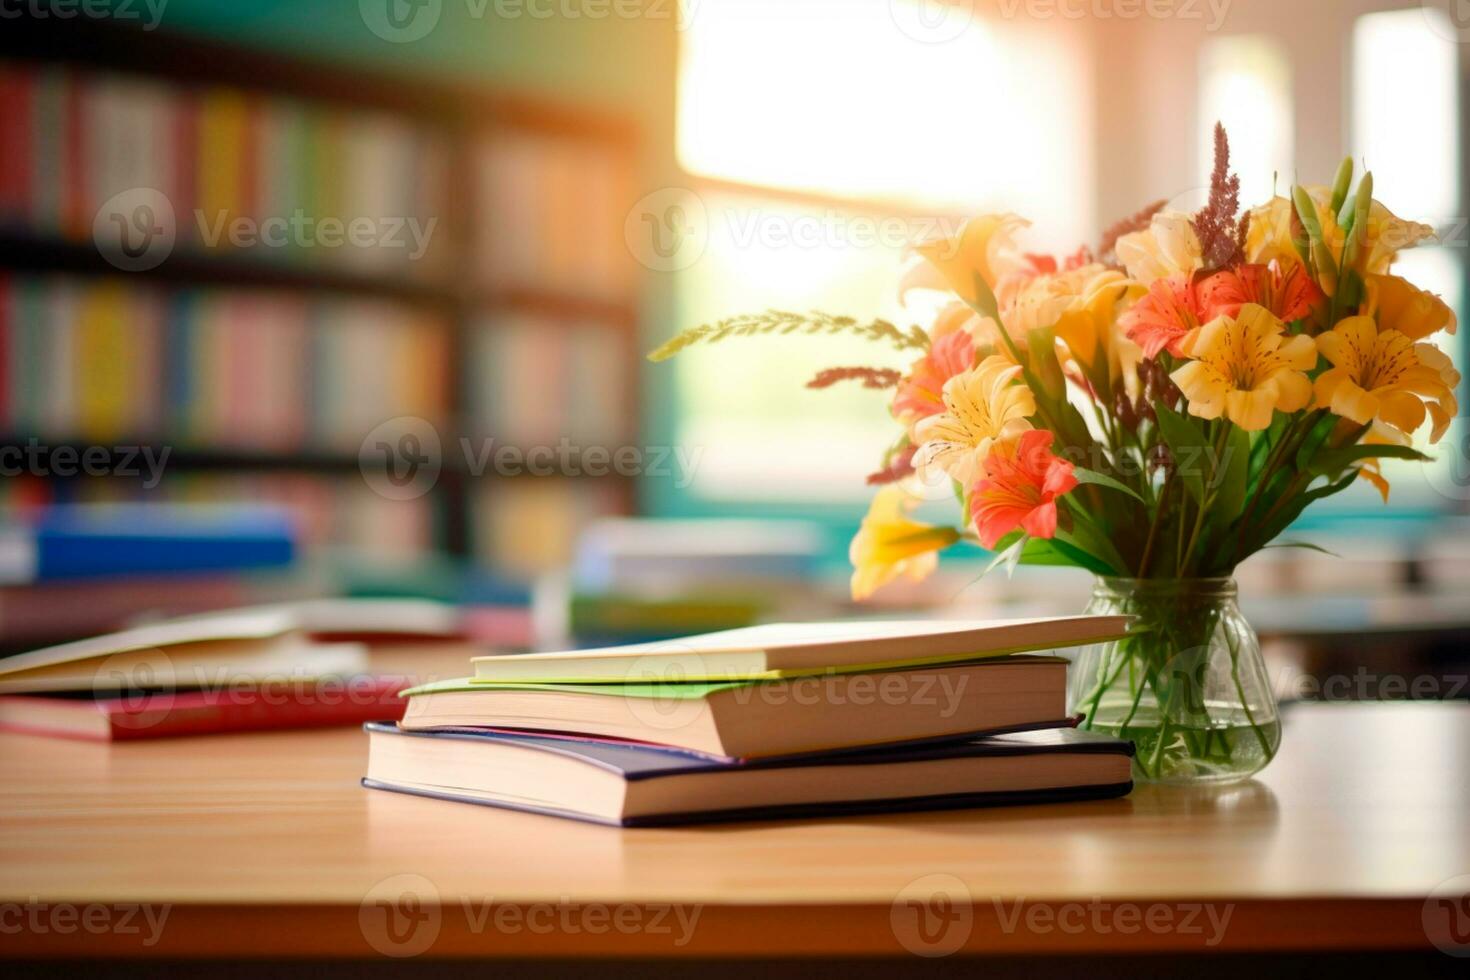 Teachers Day - Book and flowers delicately arranged on the table, celebrating the dedication and affection of educators. A special tribute to those who shape minds and hearts. photo